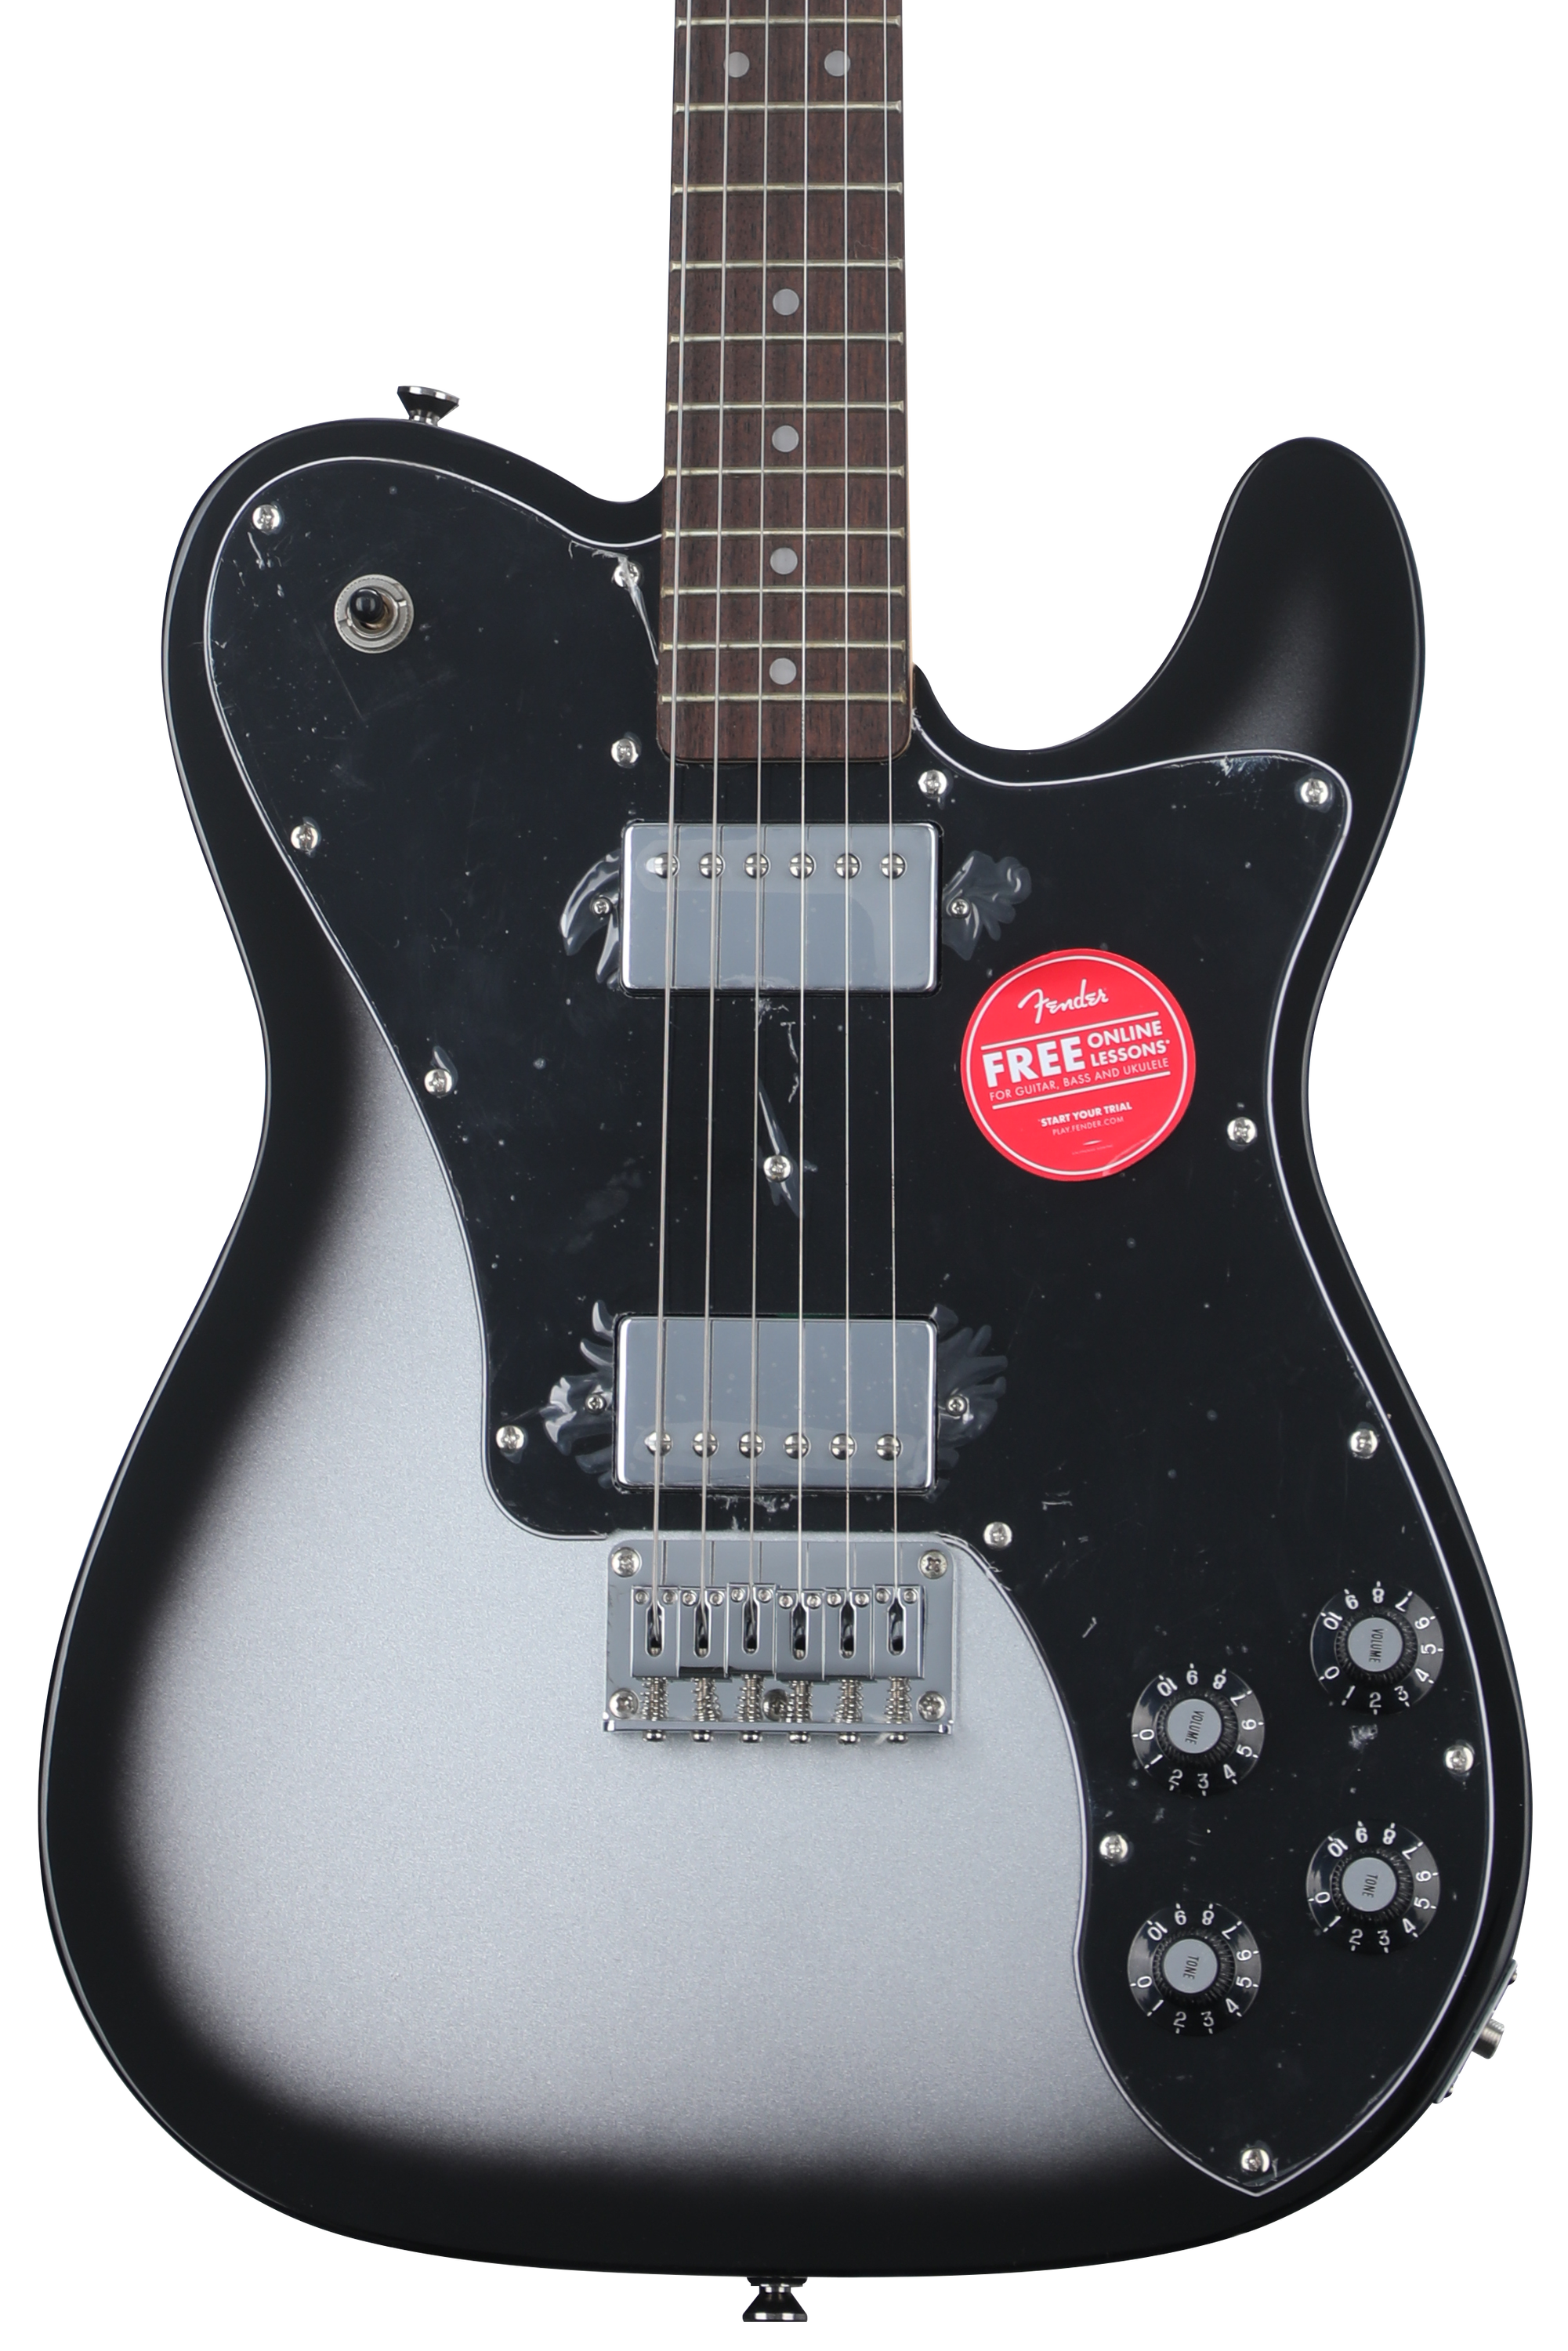 Squier Affinity Series Telecaster Deluxe Electric Guitar - Silver Burst,  Sweetwater Exclusive